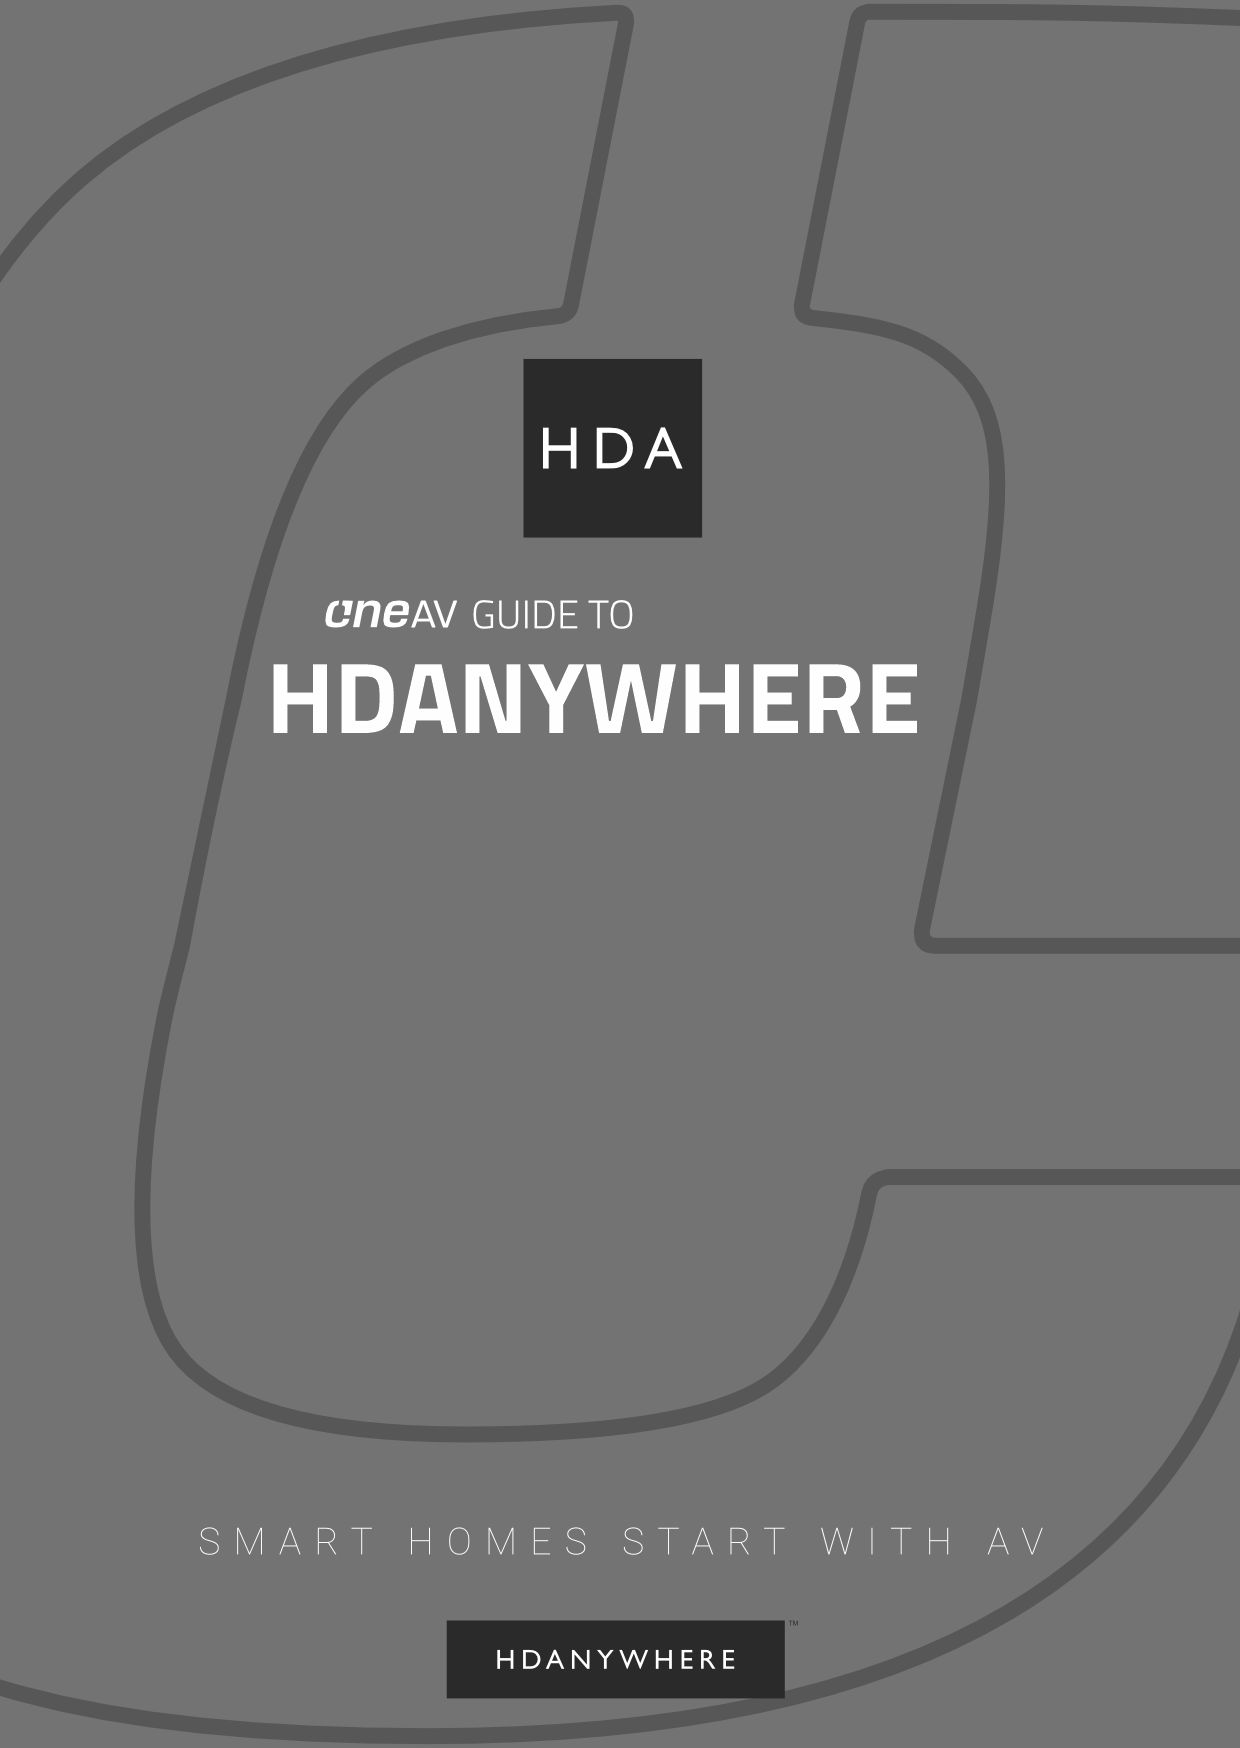 HDANYWHERE Guide